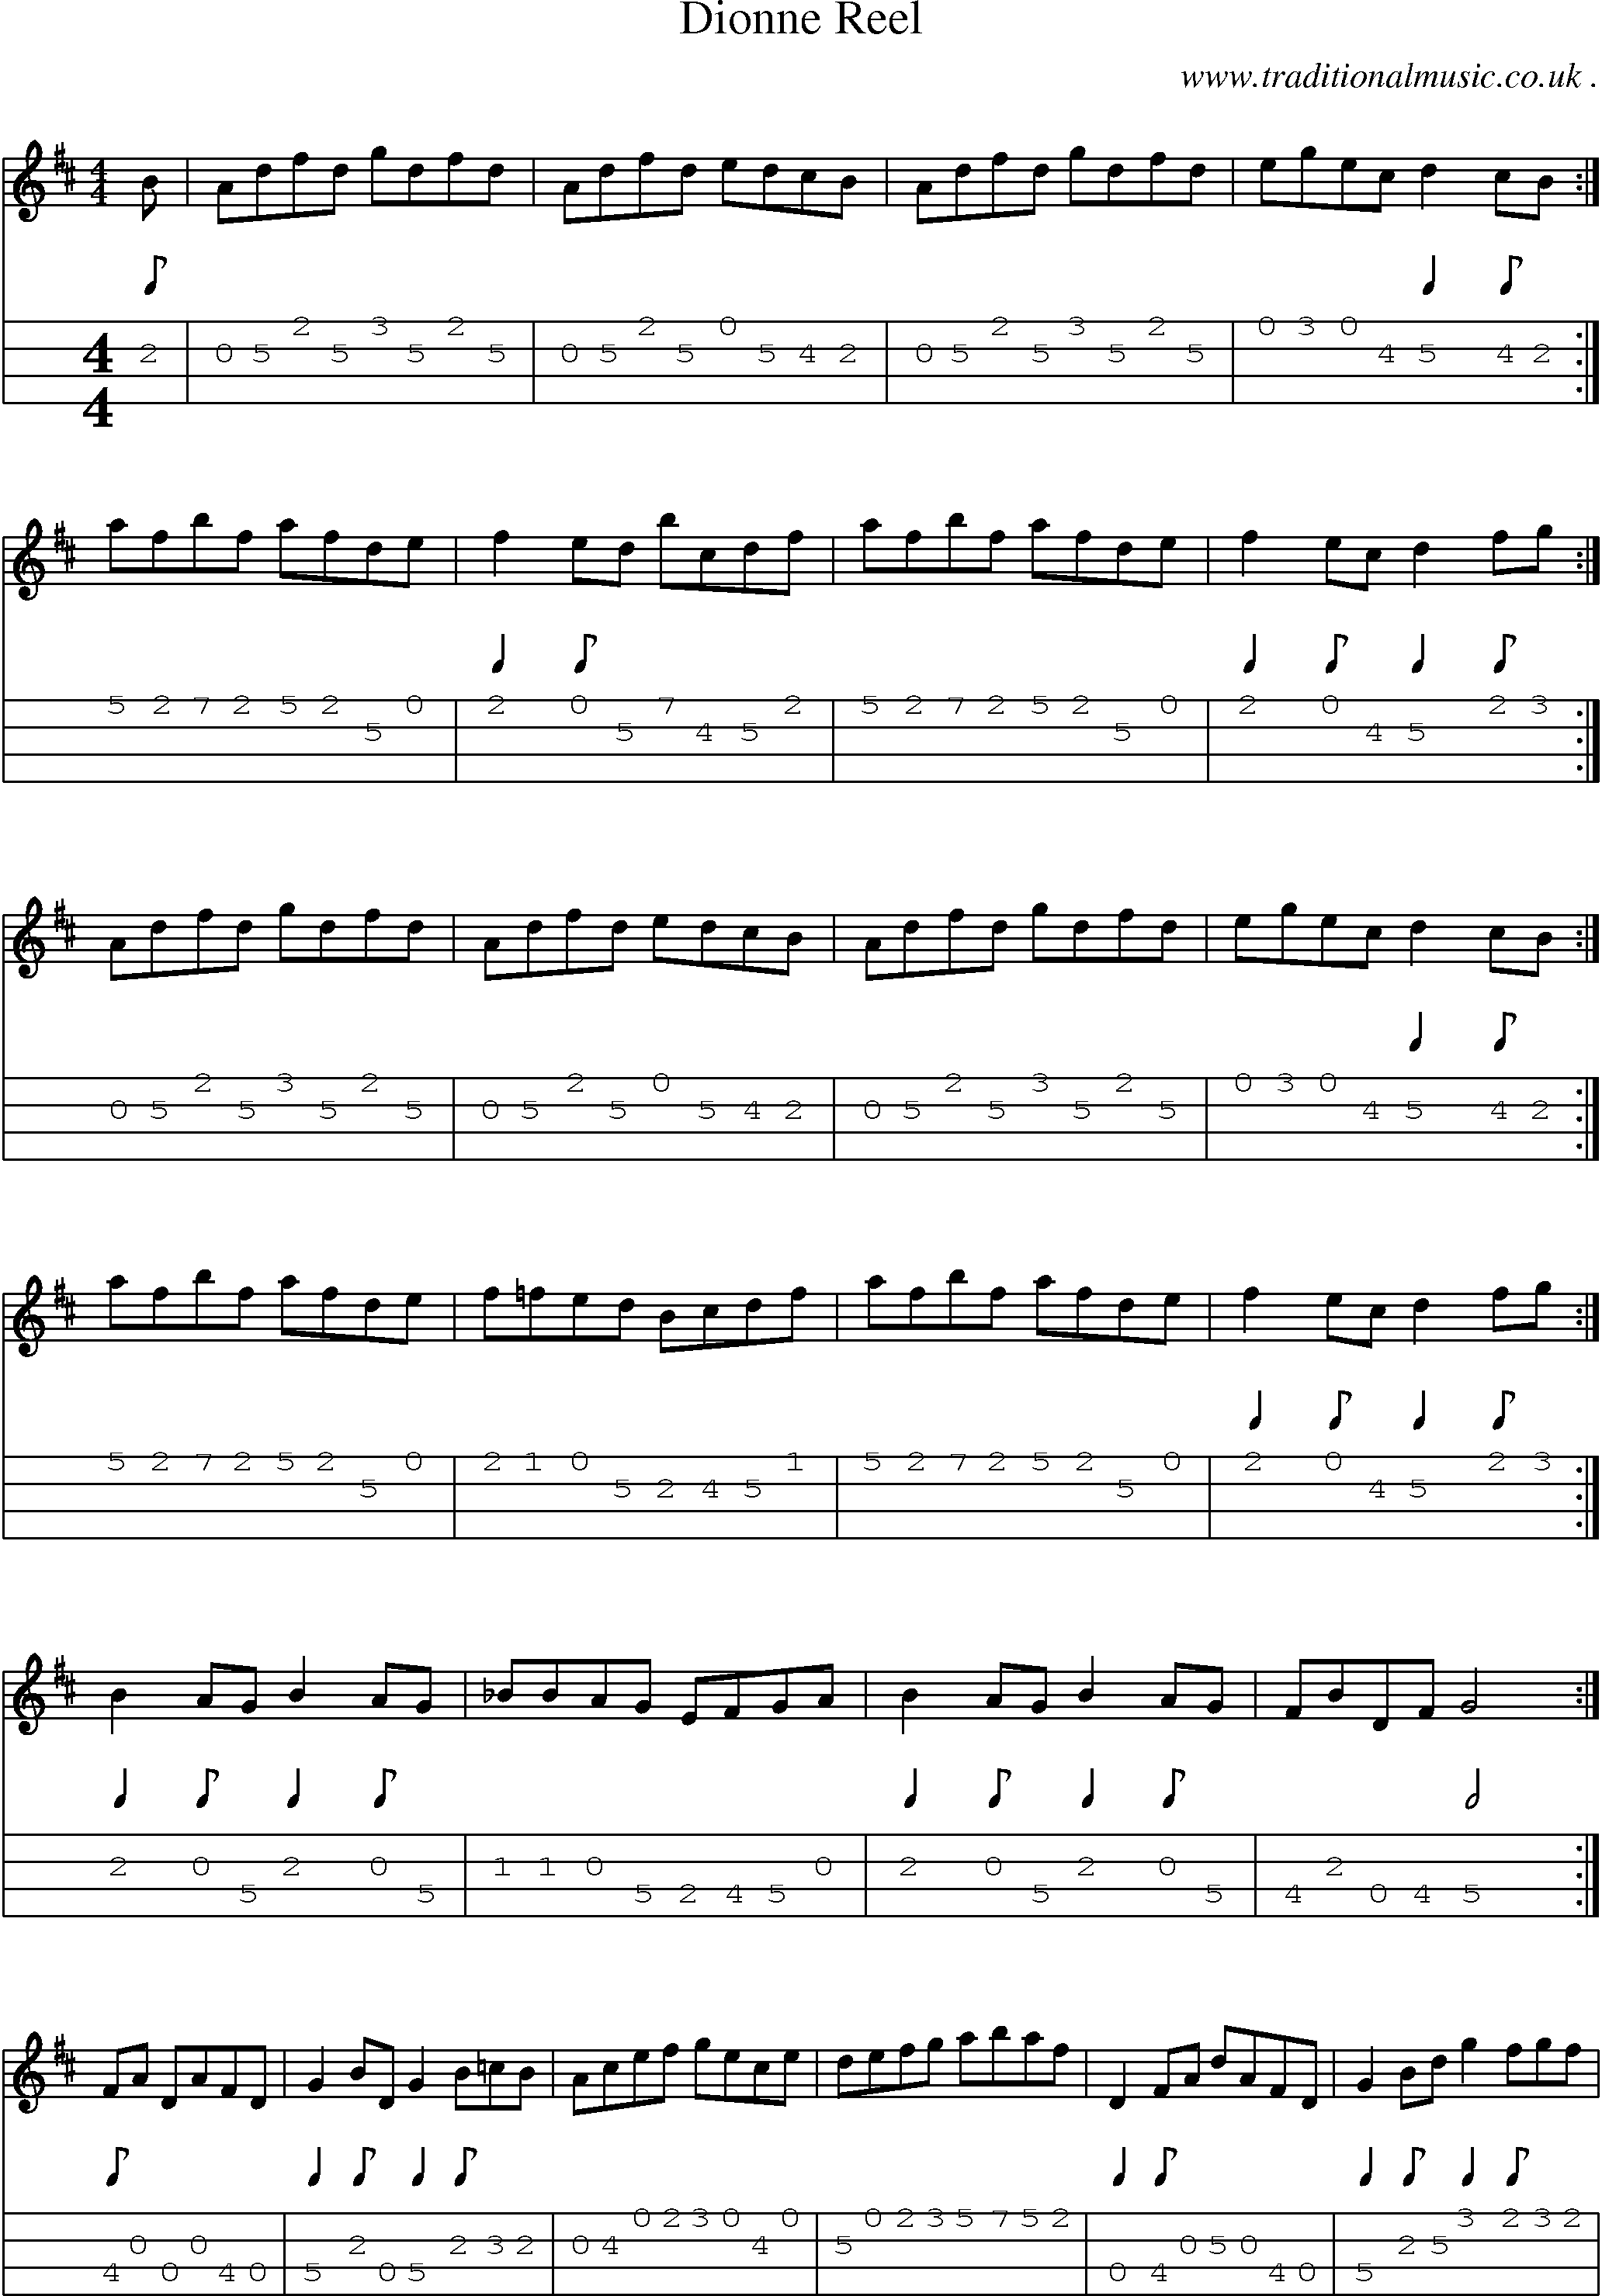 Sheet-Music and Mandolin Tabs for Dionne Reel